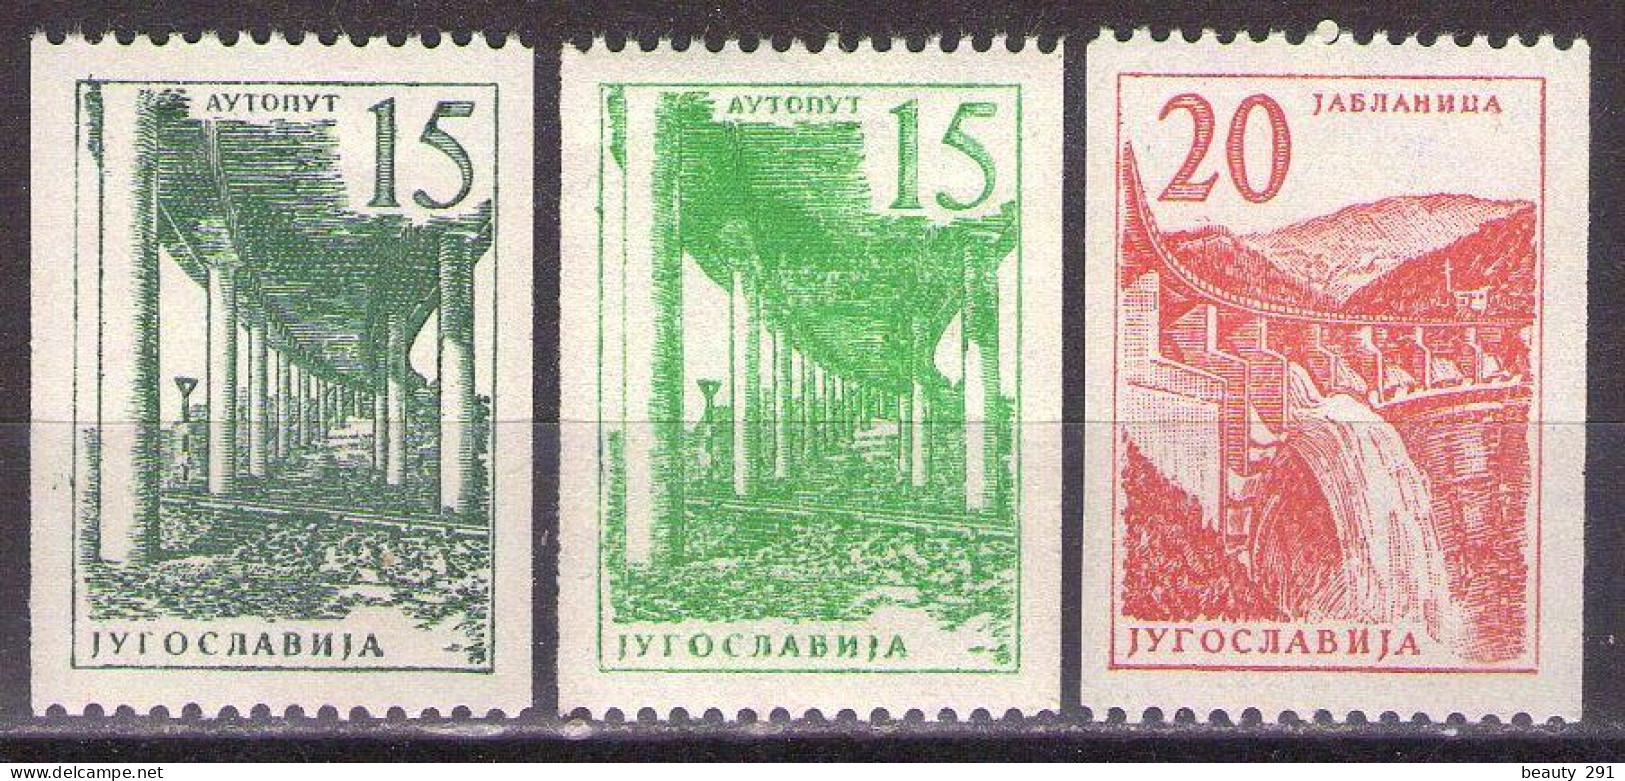 Yugoslavia 1959 - Industry And Architecture Coil Stamps - Mi 898-899a,b - MNH**VF - Ungebraucht